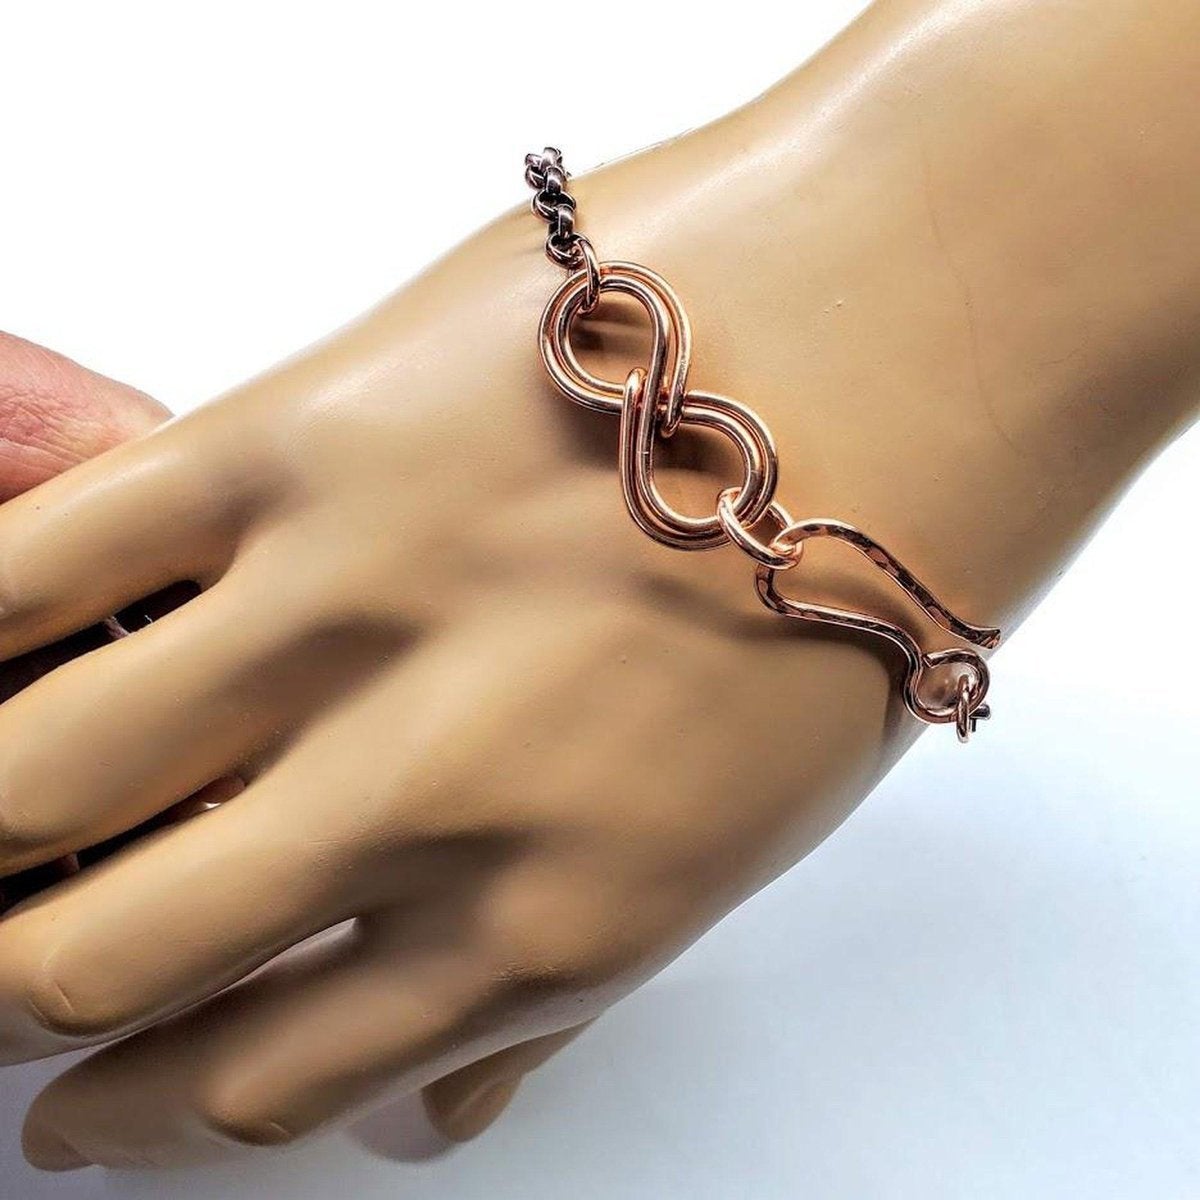 Handcrafted Copper Double Infinity Bracelet for Him and Her - Rustic Style, Available in 3 Sizes - Bracelets - Bijou Her -  -  - 